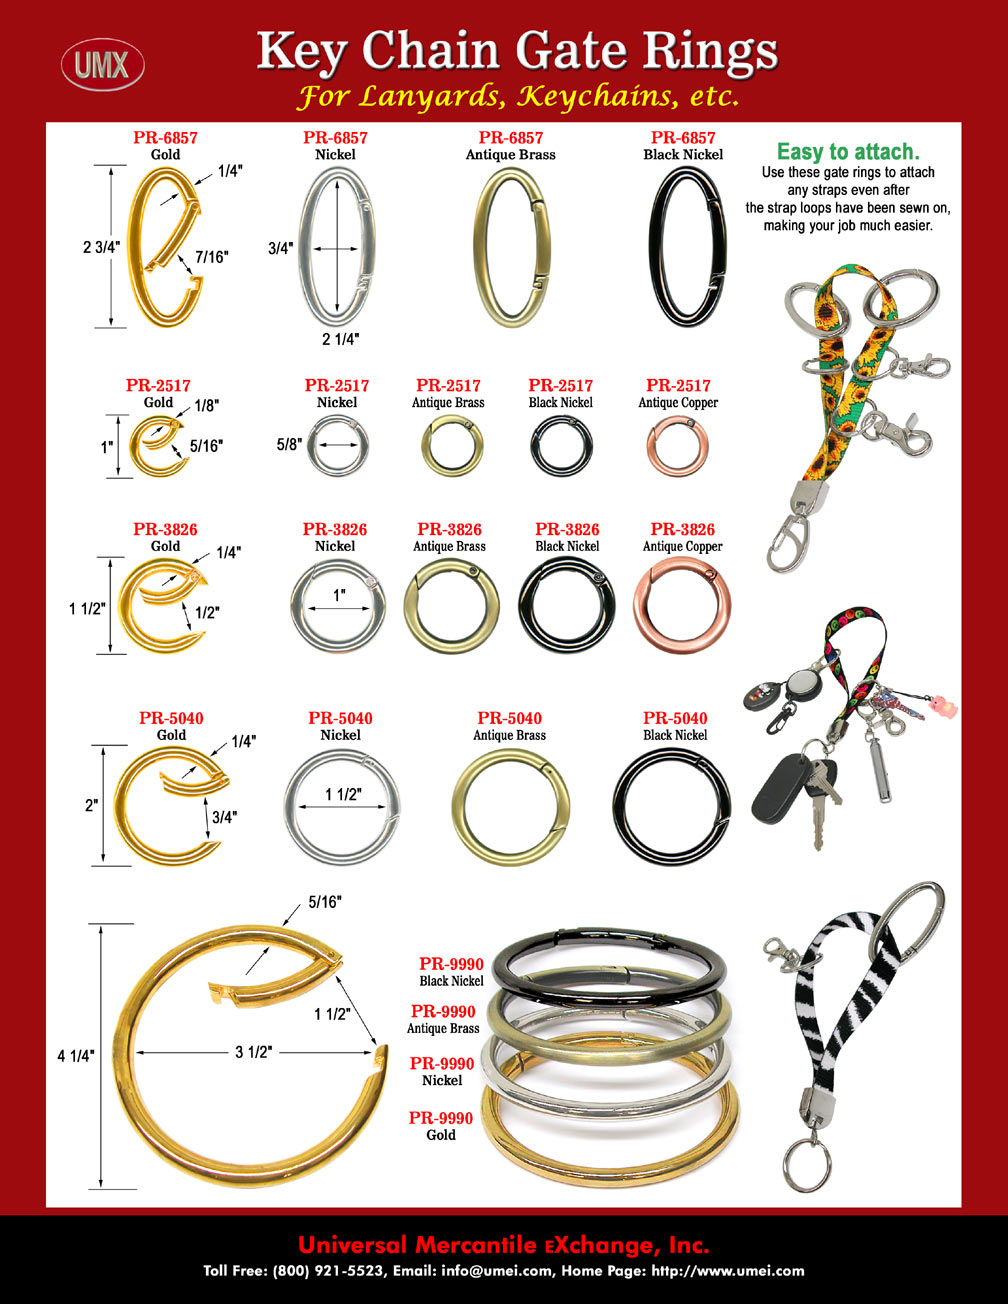 Easy Open and Easy Lock Gate Rings For Key Chains or Key Holders.